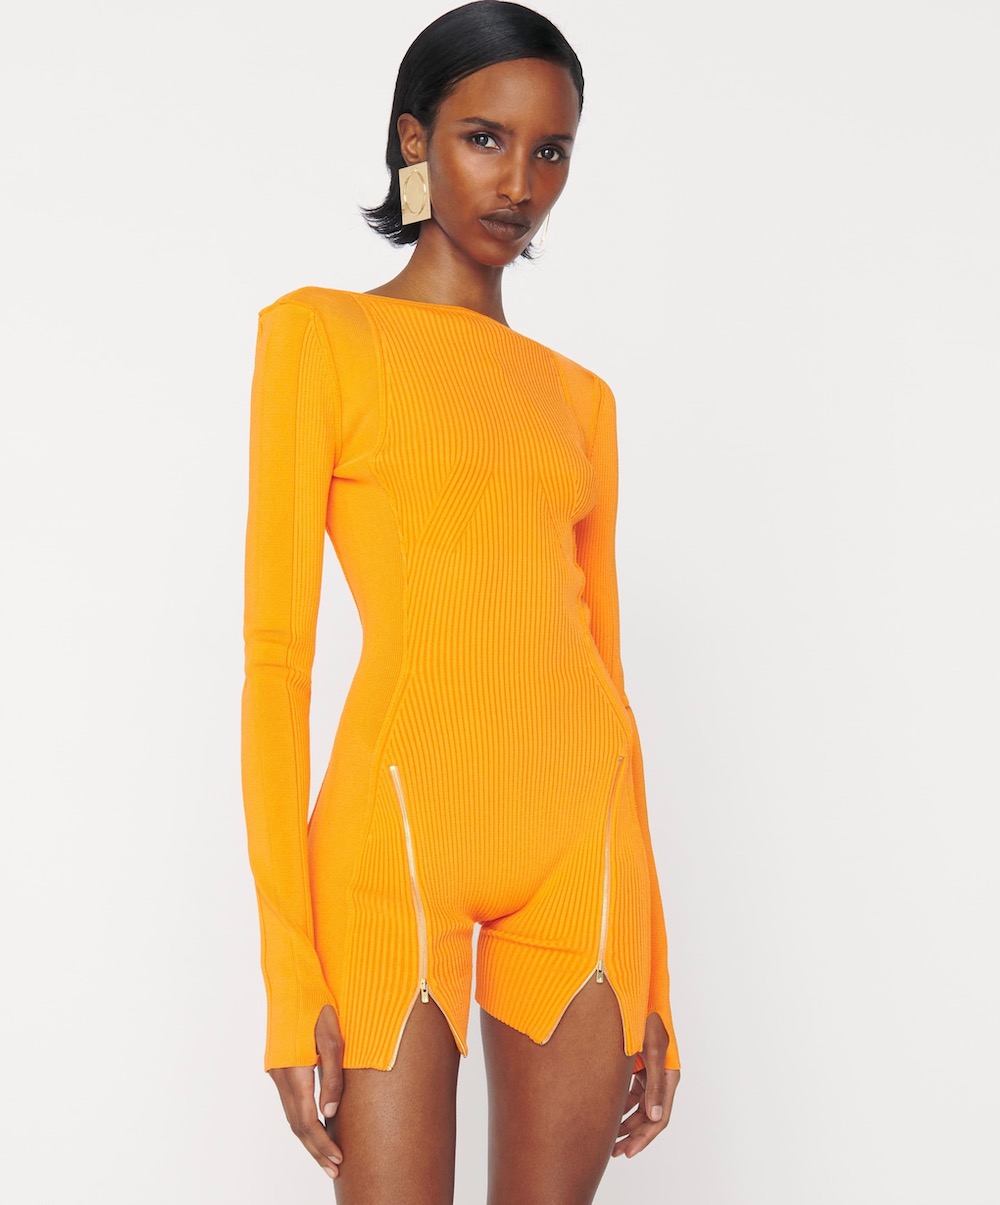 Fall Bodysuits Designed for Every Body - theFashionSpot